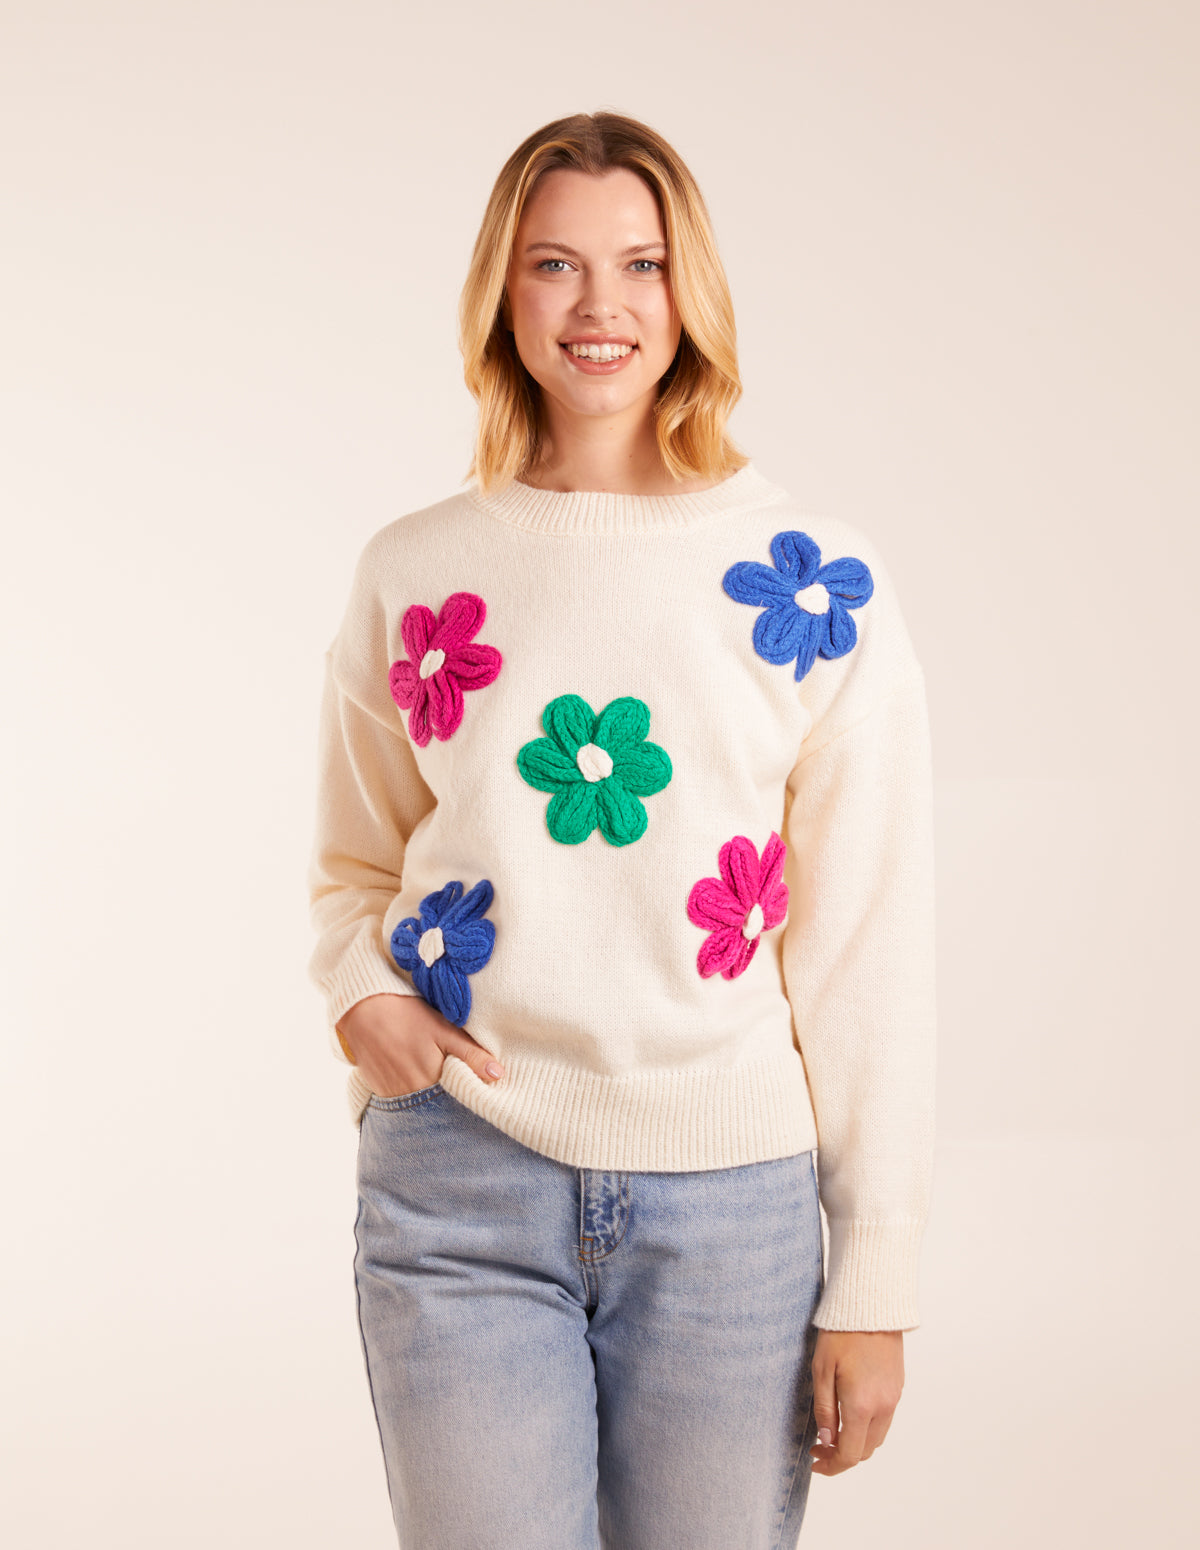 Patchwork Embroidered Daisy Flower Knit Jumper 